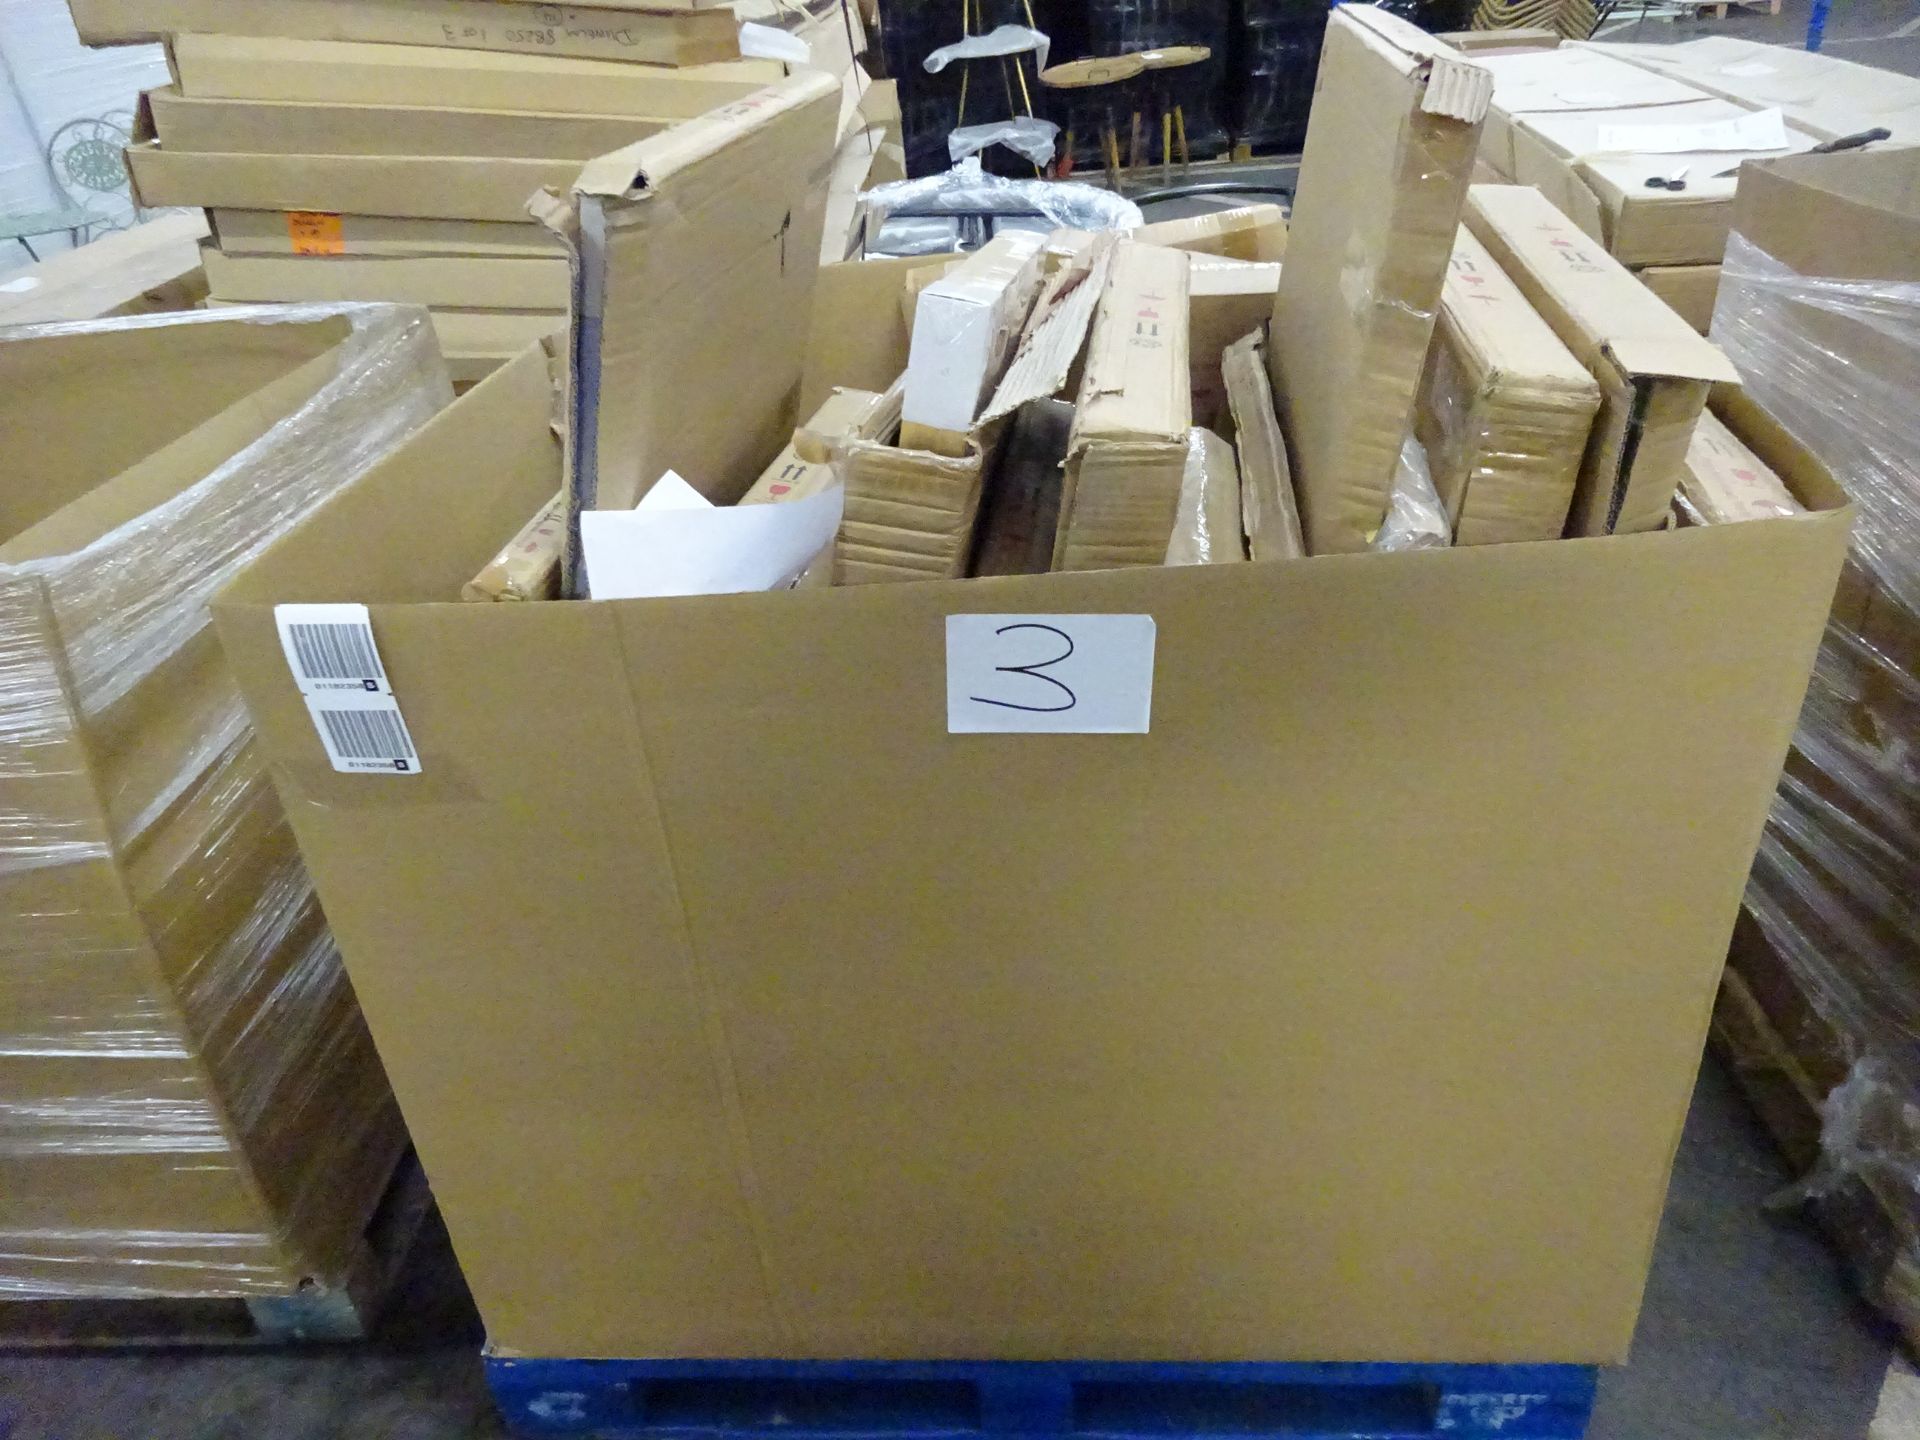 Pallet Of Arthouse Ungraded Customer Returns From Next, May Include Canvases, Wallpaper, Wall Art, H